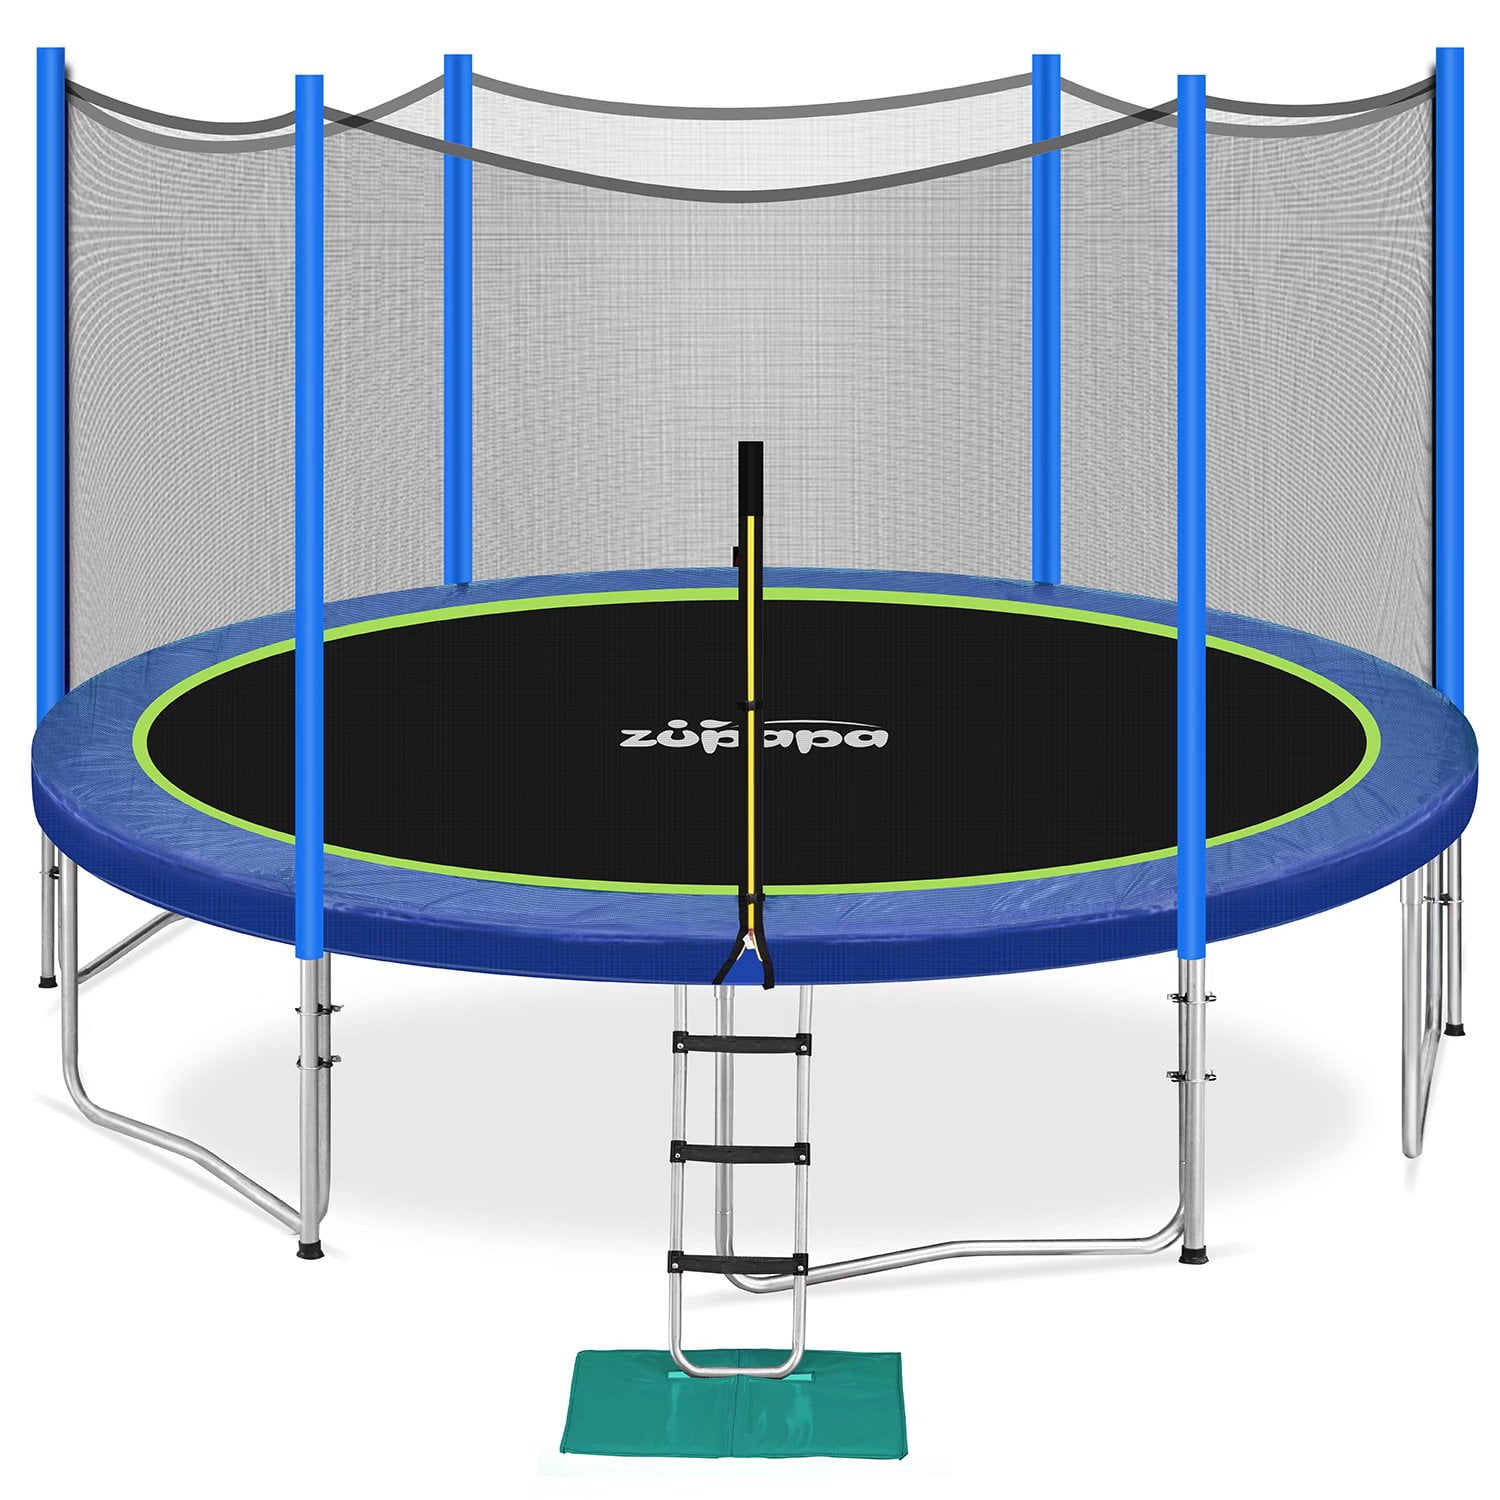 Zupapa 16 15 14 12 10 8FT Kids Trampoline 425LBS Weight Capacity with Enclosure net Non-Slip Ladder Wind Stakes All Accessories Outdoor Backyard Family Trampolines 